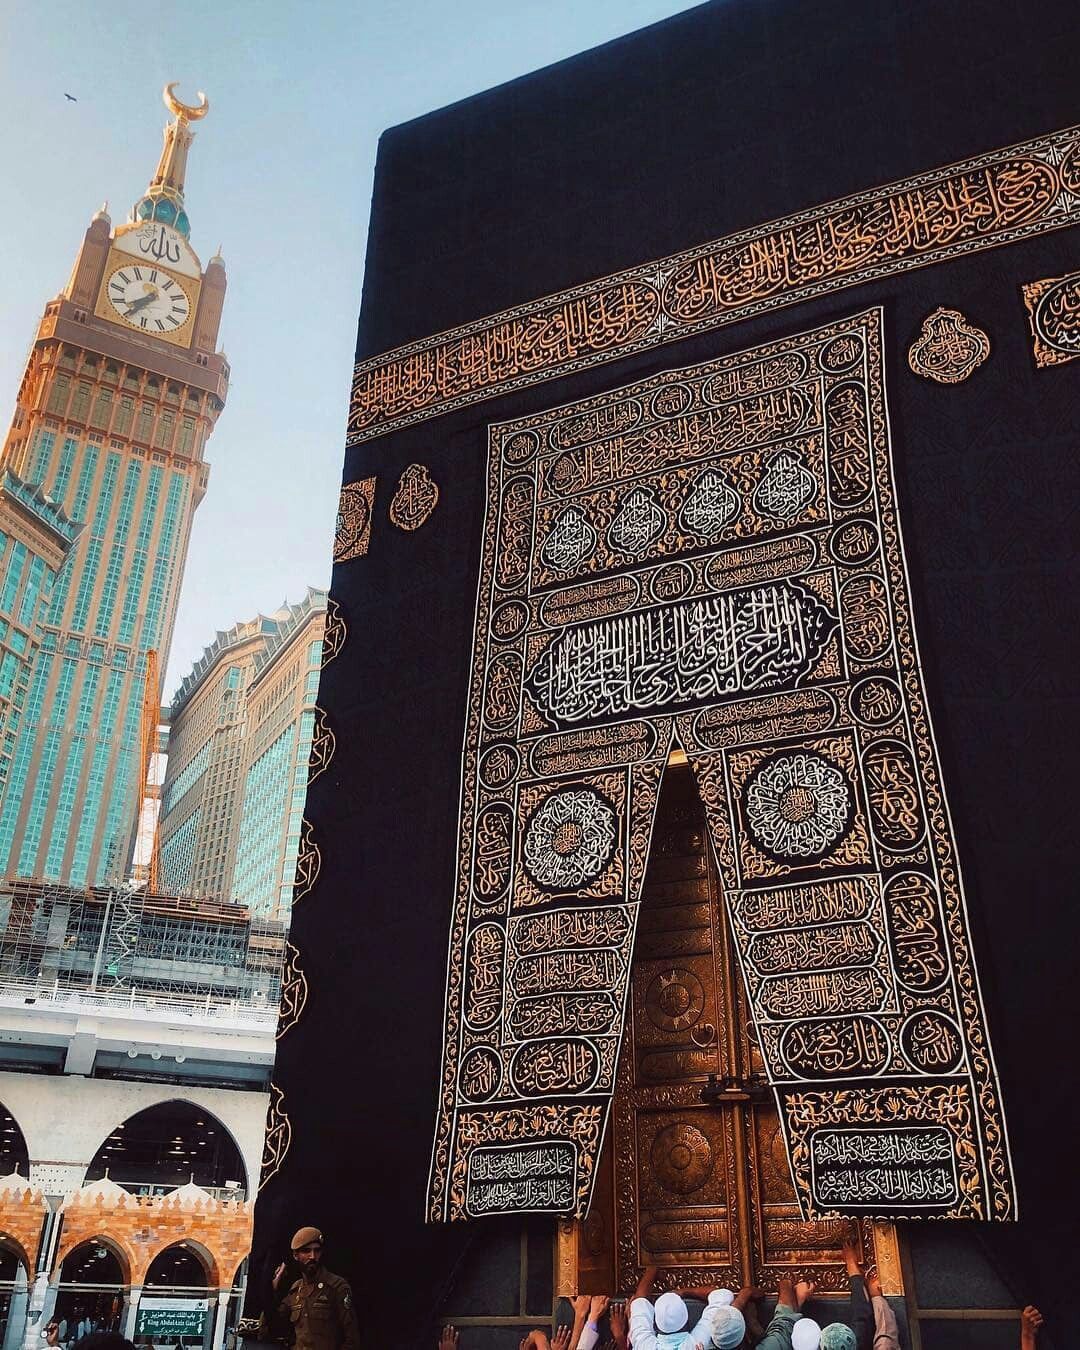 Secrets of the Black Stone in the Kaaba and what is its story